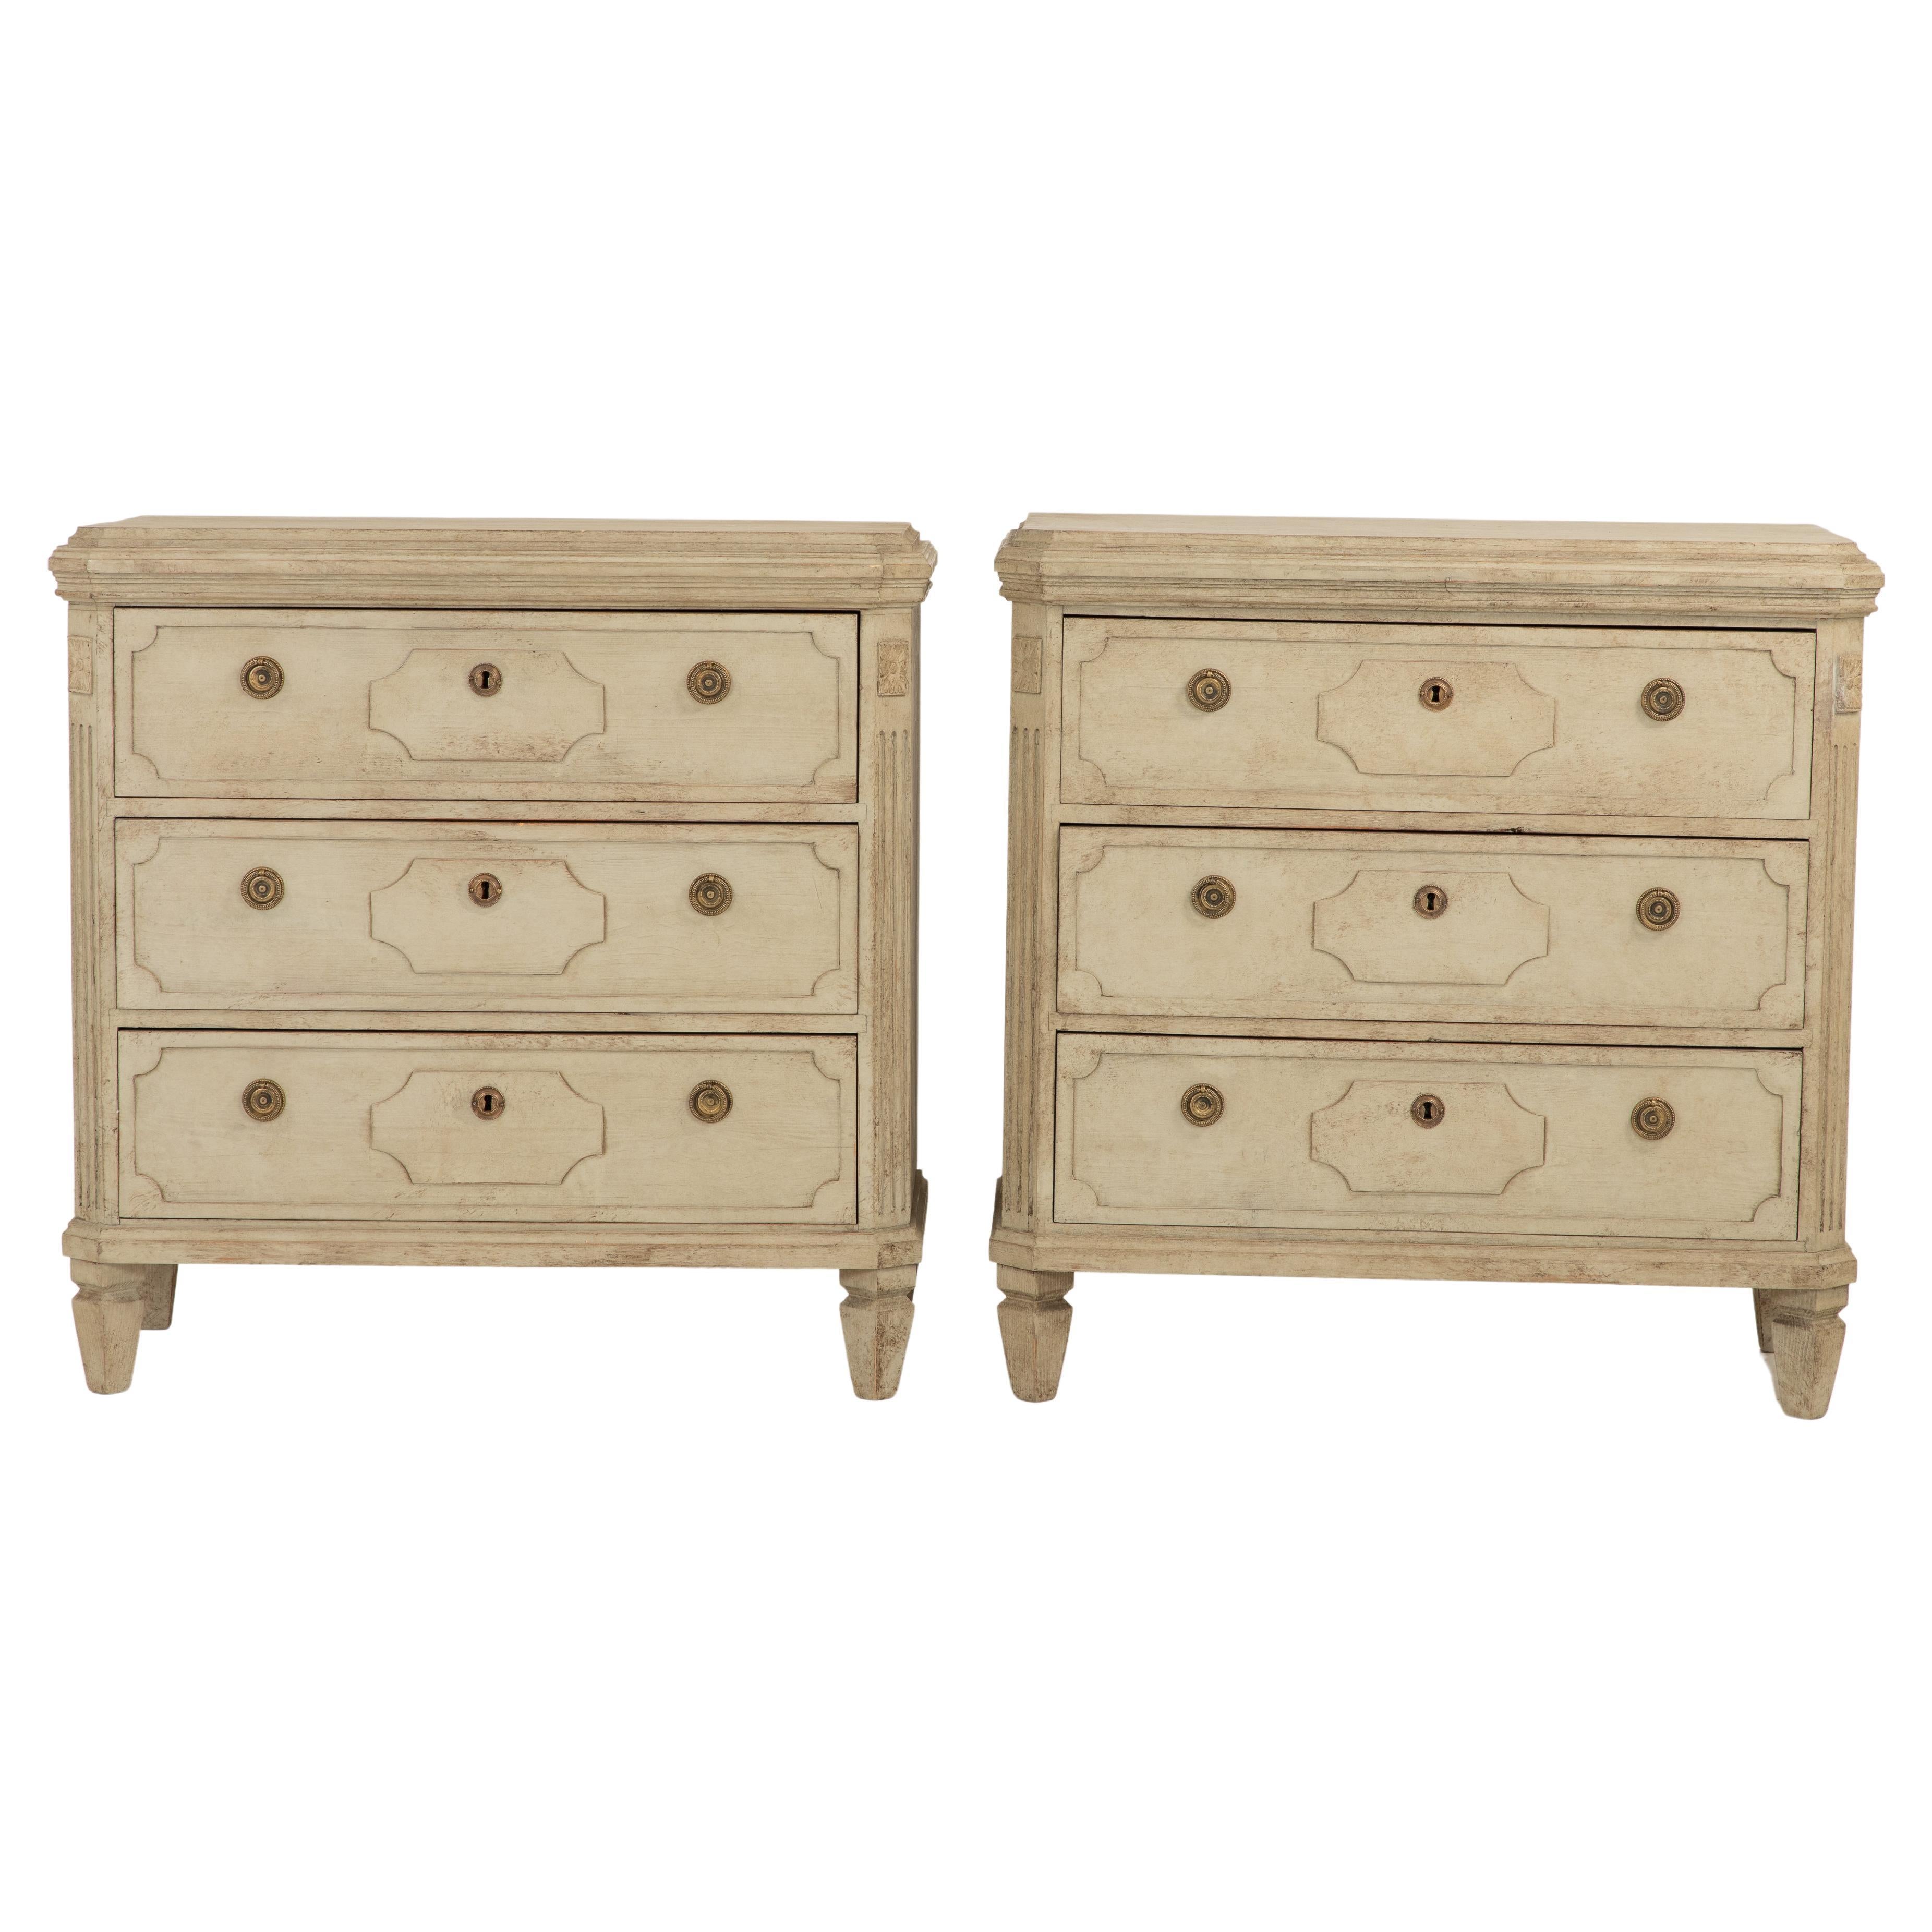 Antique Gustavian Style Chests of Drawers, a Pair